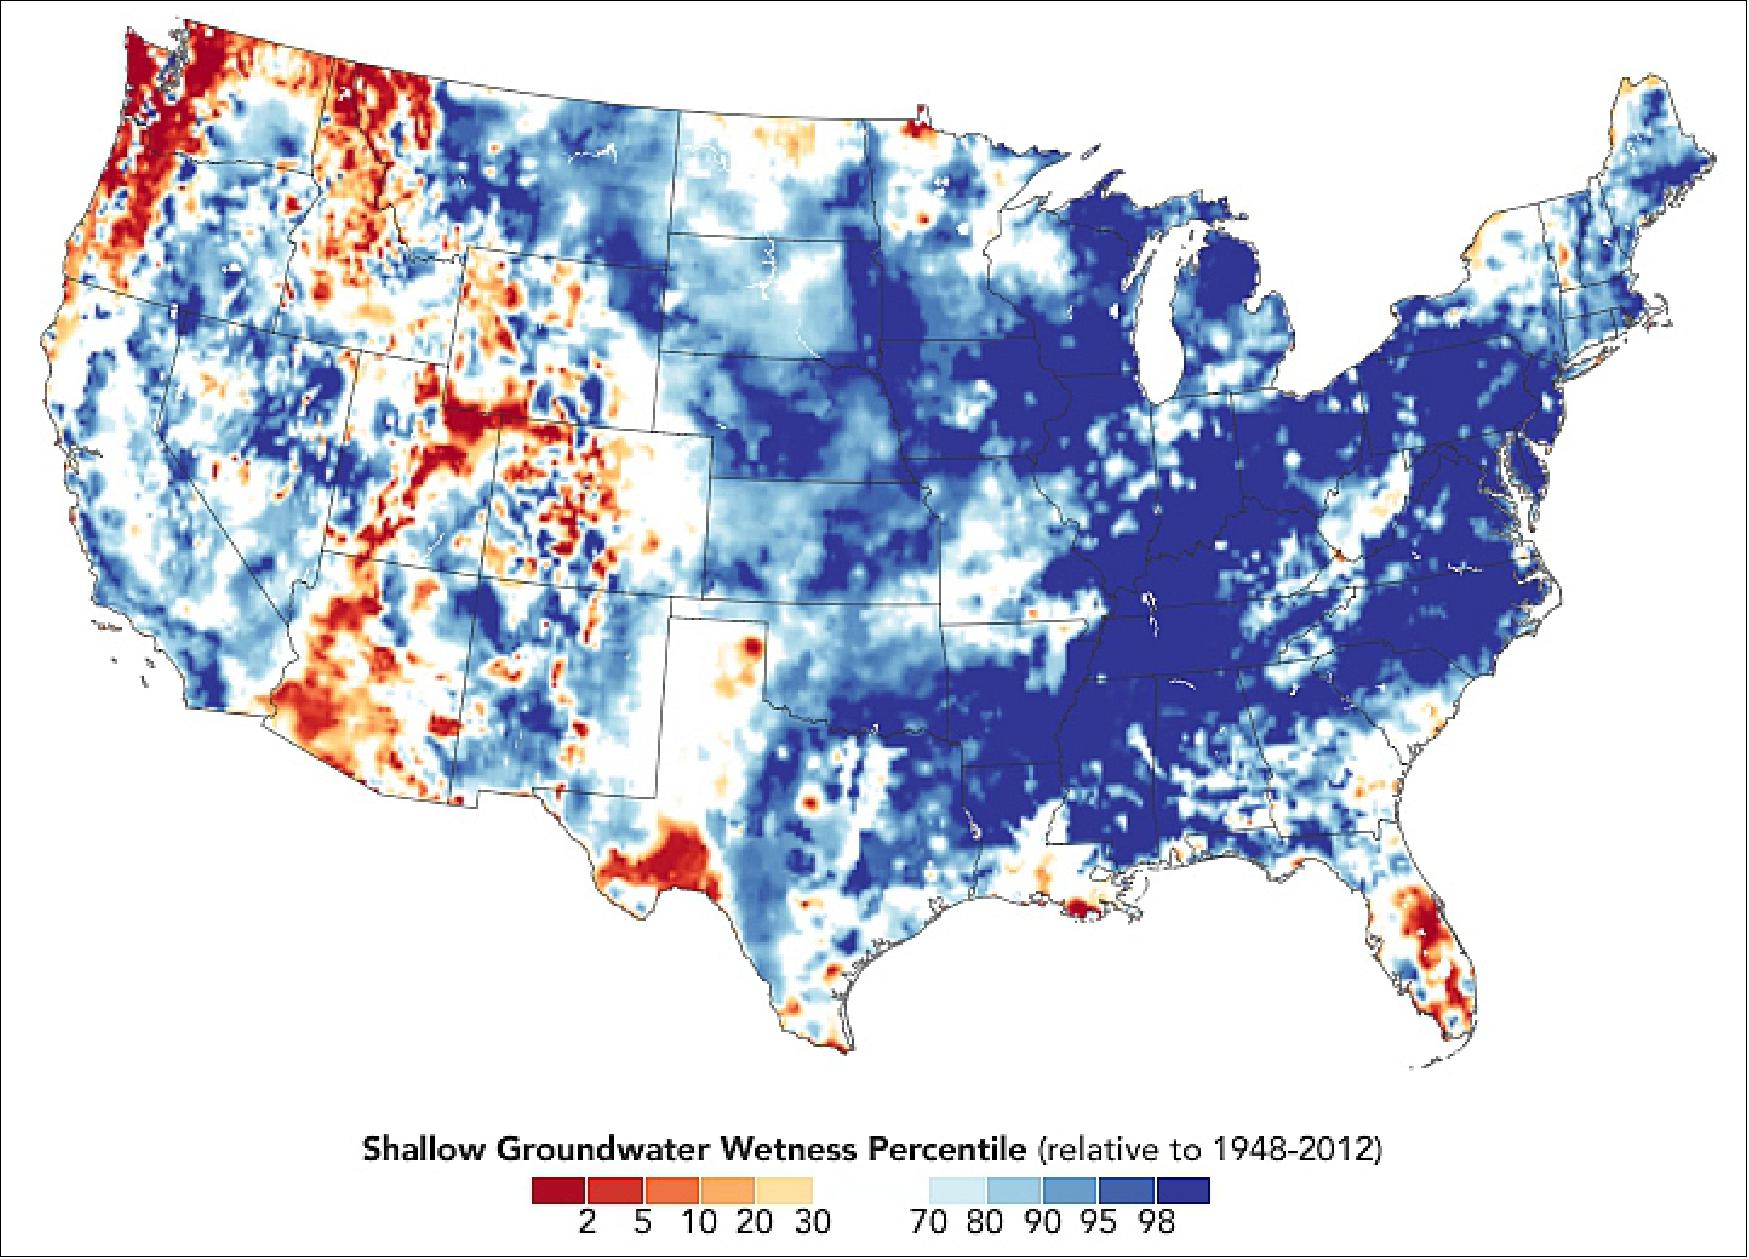 Figure 19: This map shows how groundwater has responded to the unusually wet year. The colors depict the wetness percentile; that is, how the amount of groundwater on May 13, 2019, compares to all Mays from 1948 to 2012. Blue areas have more abundant groundwater than usual for the time of year, and orange and red areas have less. The map is based on multiple types of meteorological data (precipitation, temperature, etc.) integrated within an advanced computer model developed by scientists at NASA's Goddard Space Flight Center (image credit: NASA Earth Observatory image by Lauren Dauphin and Joshua Stevens using soil moisture data from the NASA-USDA SMAP team and using GRACE data from The National Drought Mitigation Center at the University of Nebraska-Lincoln, and rainfall data from The Iowa Environmental Mesonet The Iowa Environmental Mesonet (IEM). Story by Mike Carlowicz)